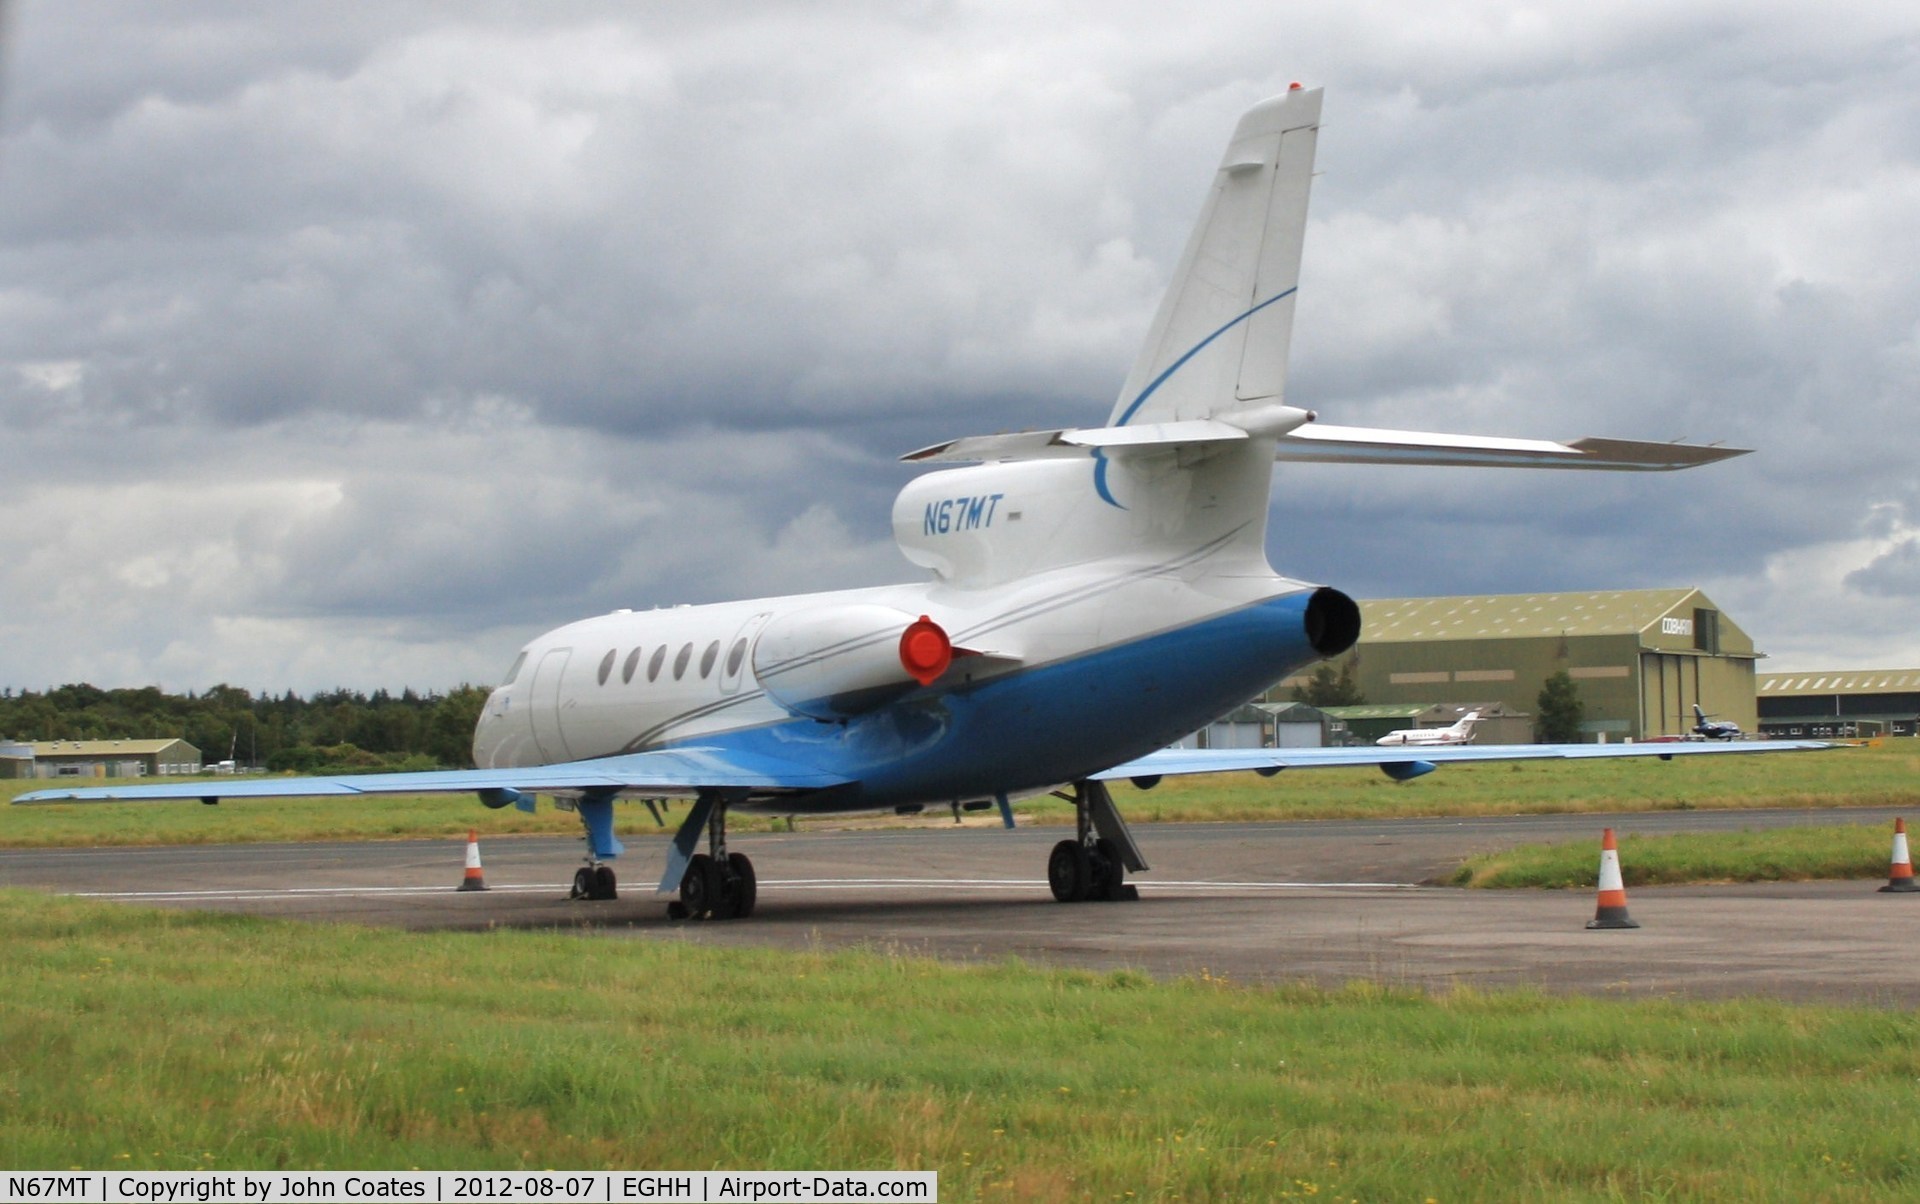 N67MT, 1996 Dassault Mystere Falcon 50 C/N 254, At Sigs